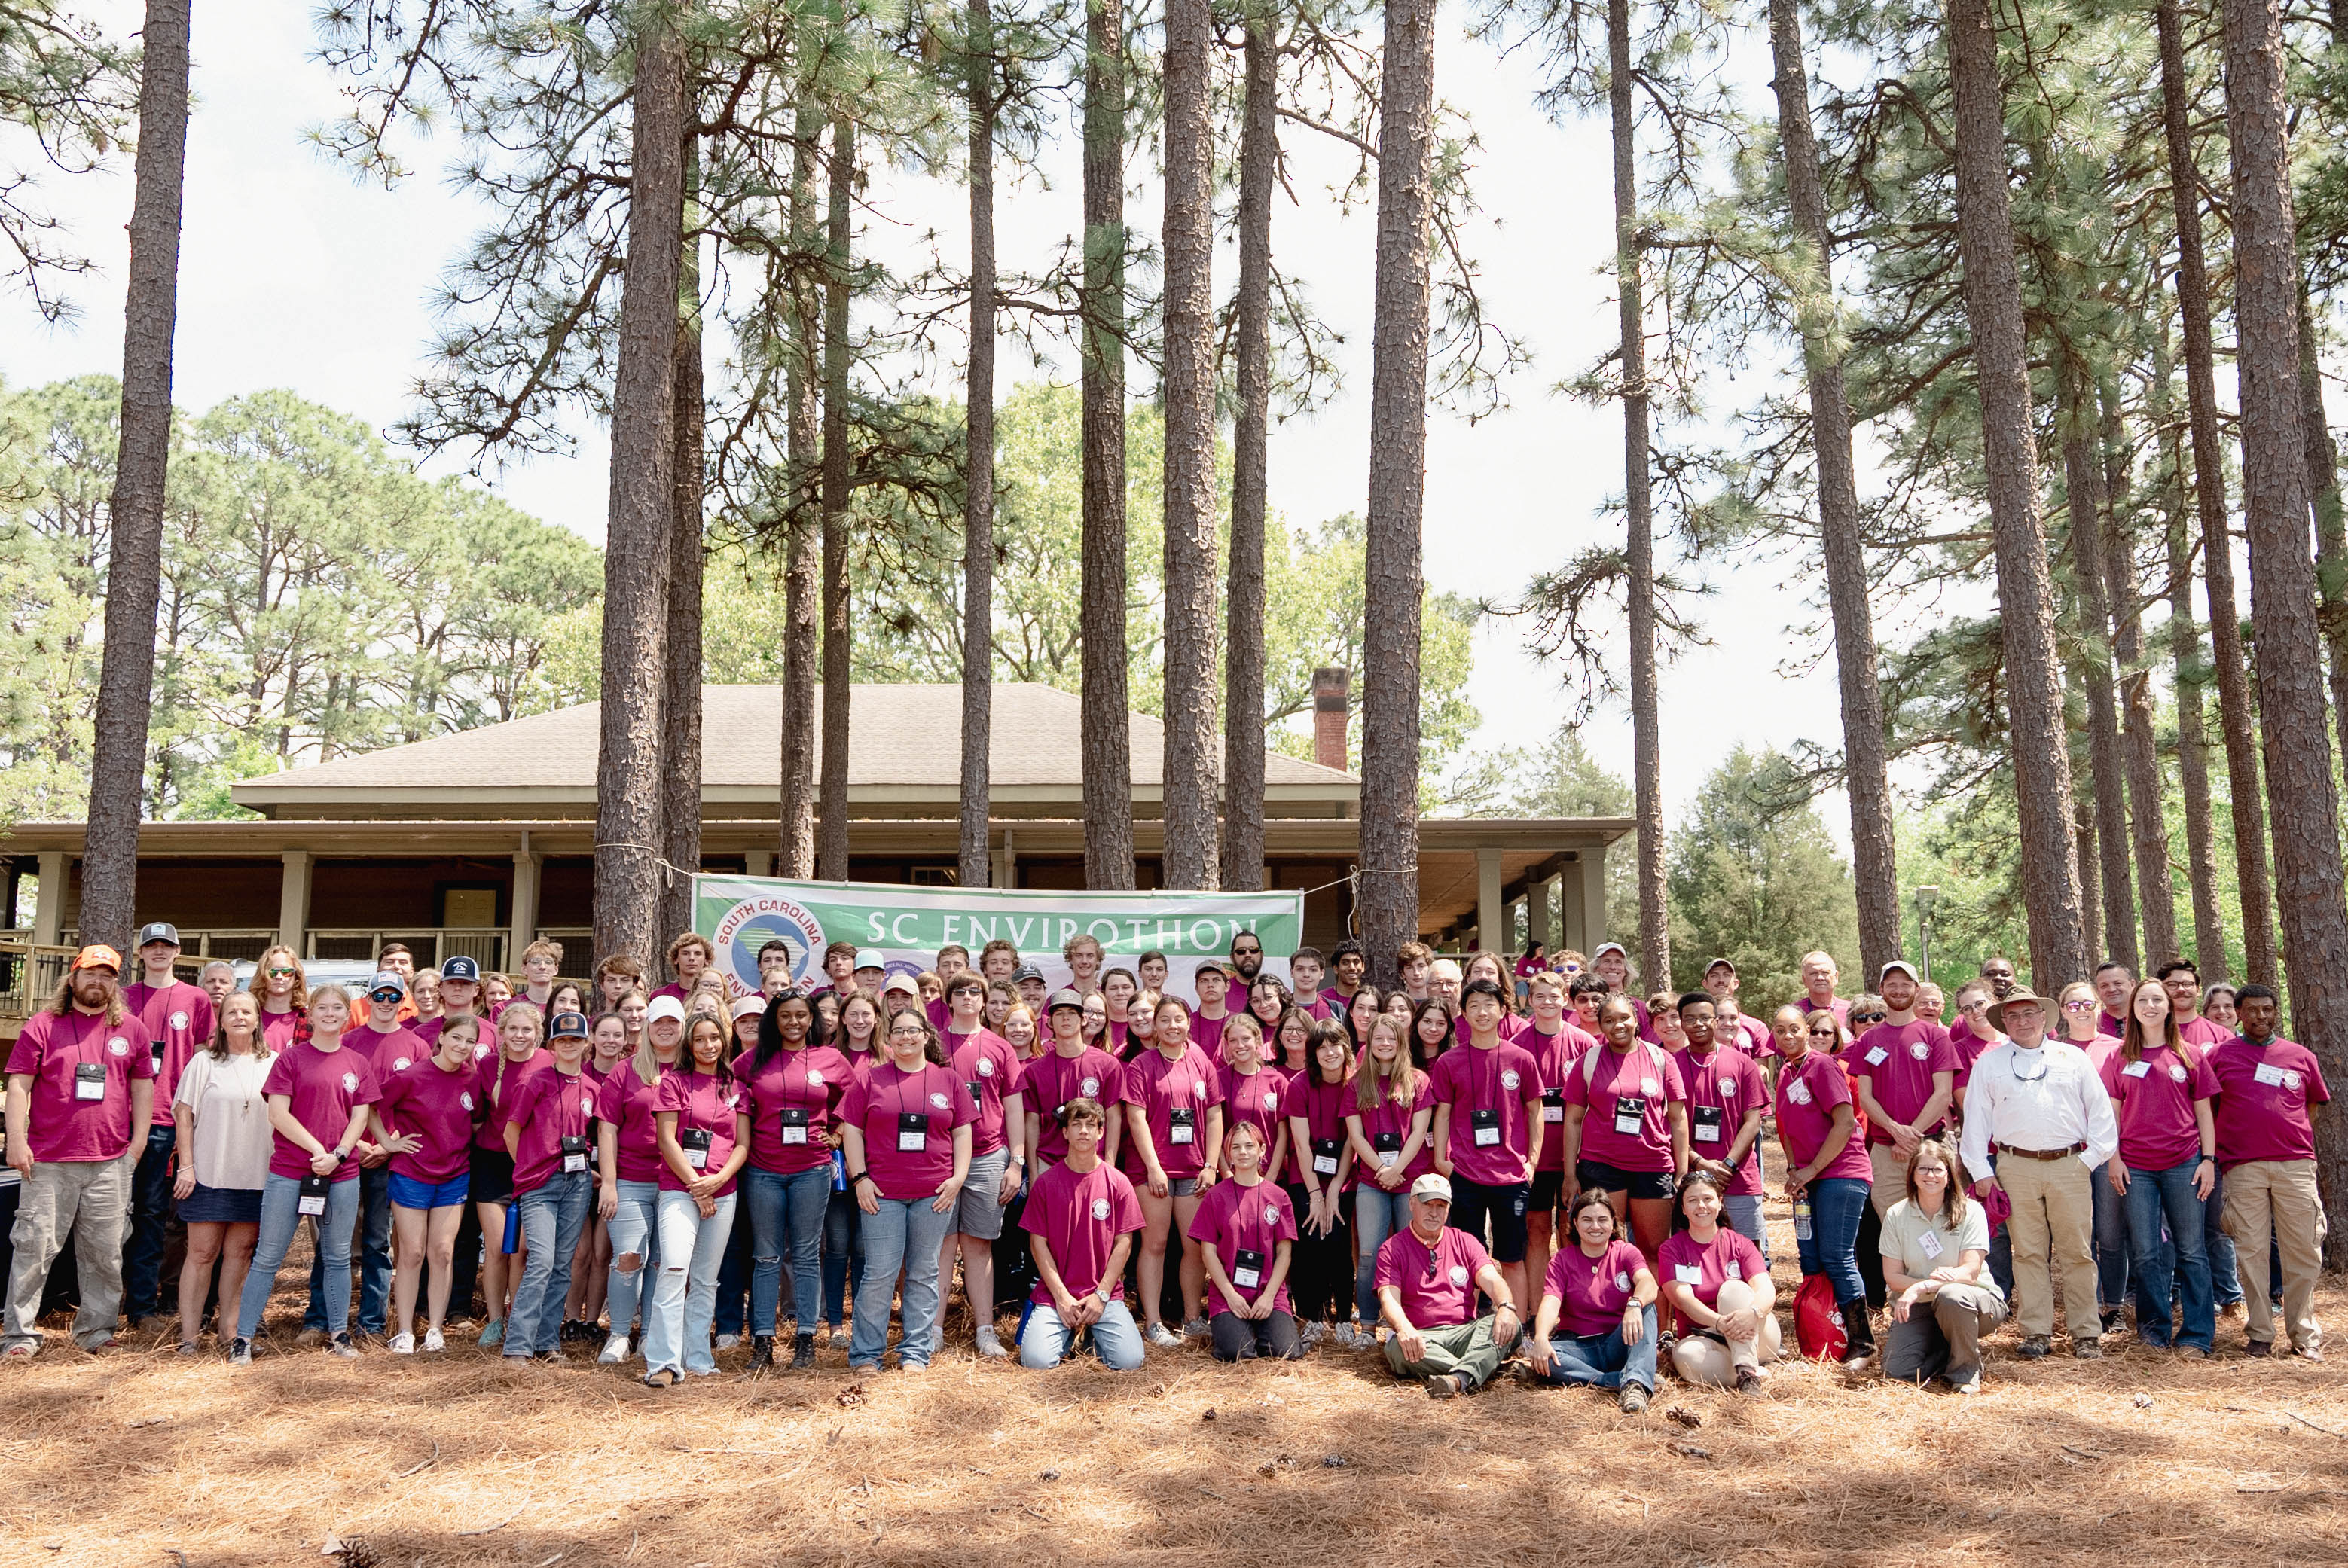 High school students and team coaches pose for a group photo at the SC Envirothon competition